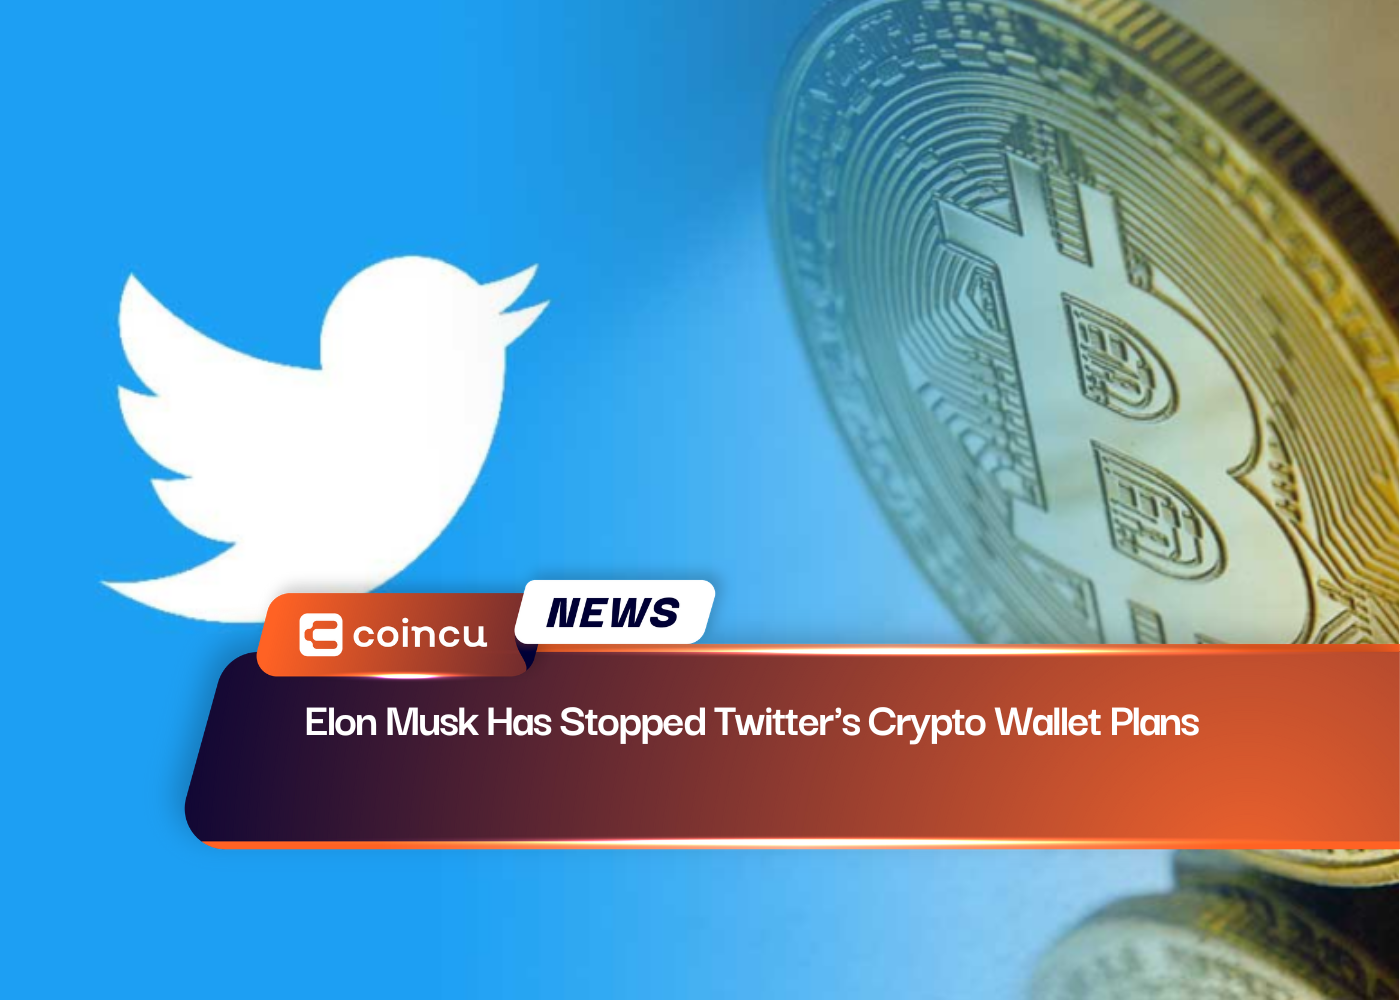 Elon Musk Has Stopped Twitter's Crypto Wallet Plans